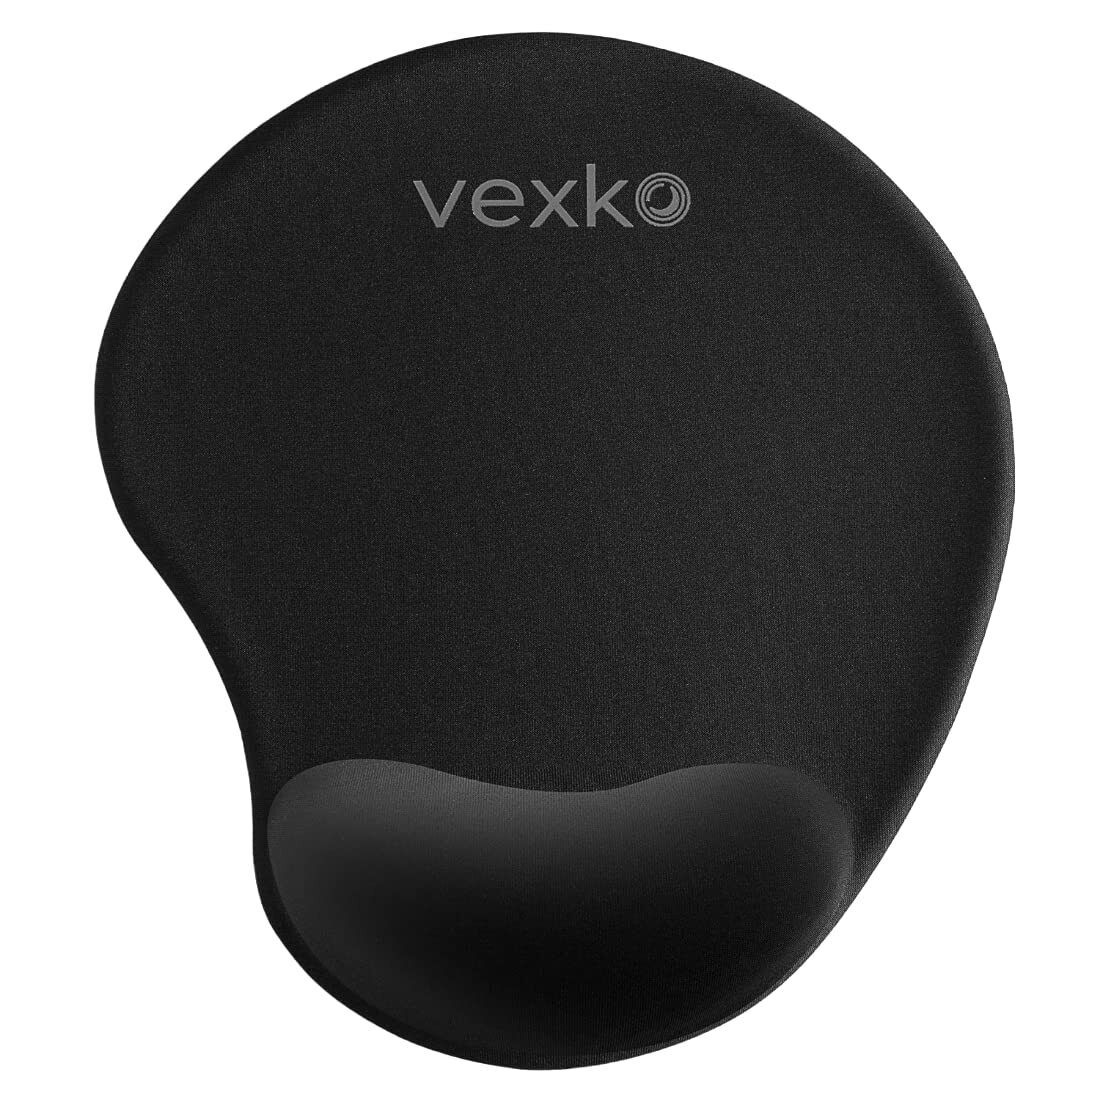 Vexko Mouse Pad with Gel Wrist Support Mouse Mat with Non-Slip PU Base Smooth...